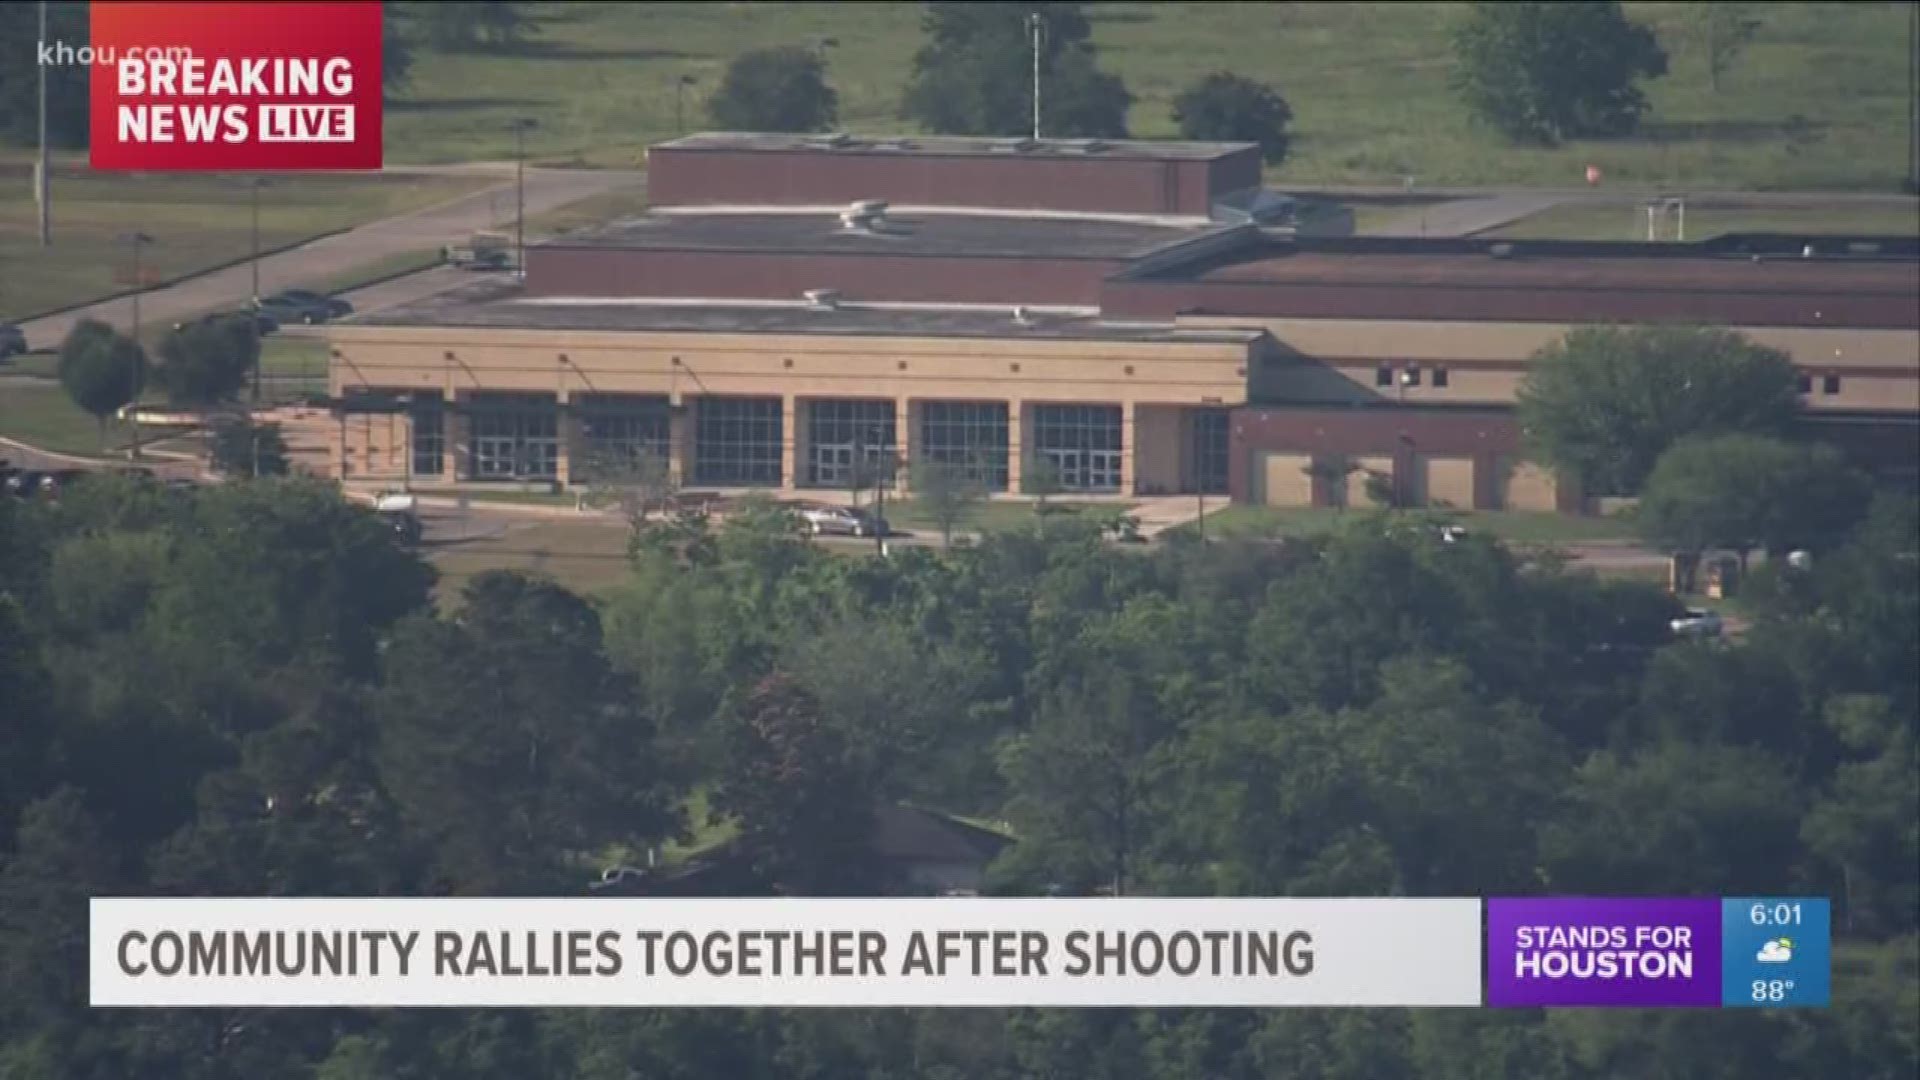 We have verified the name of a victim killed in the mass shooting at Santa Fe High School.